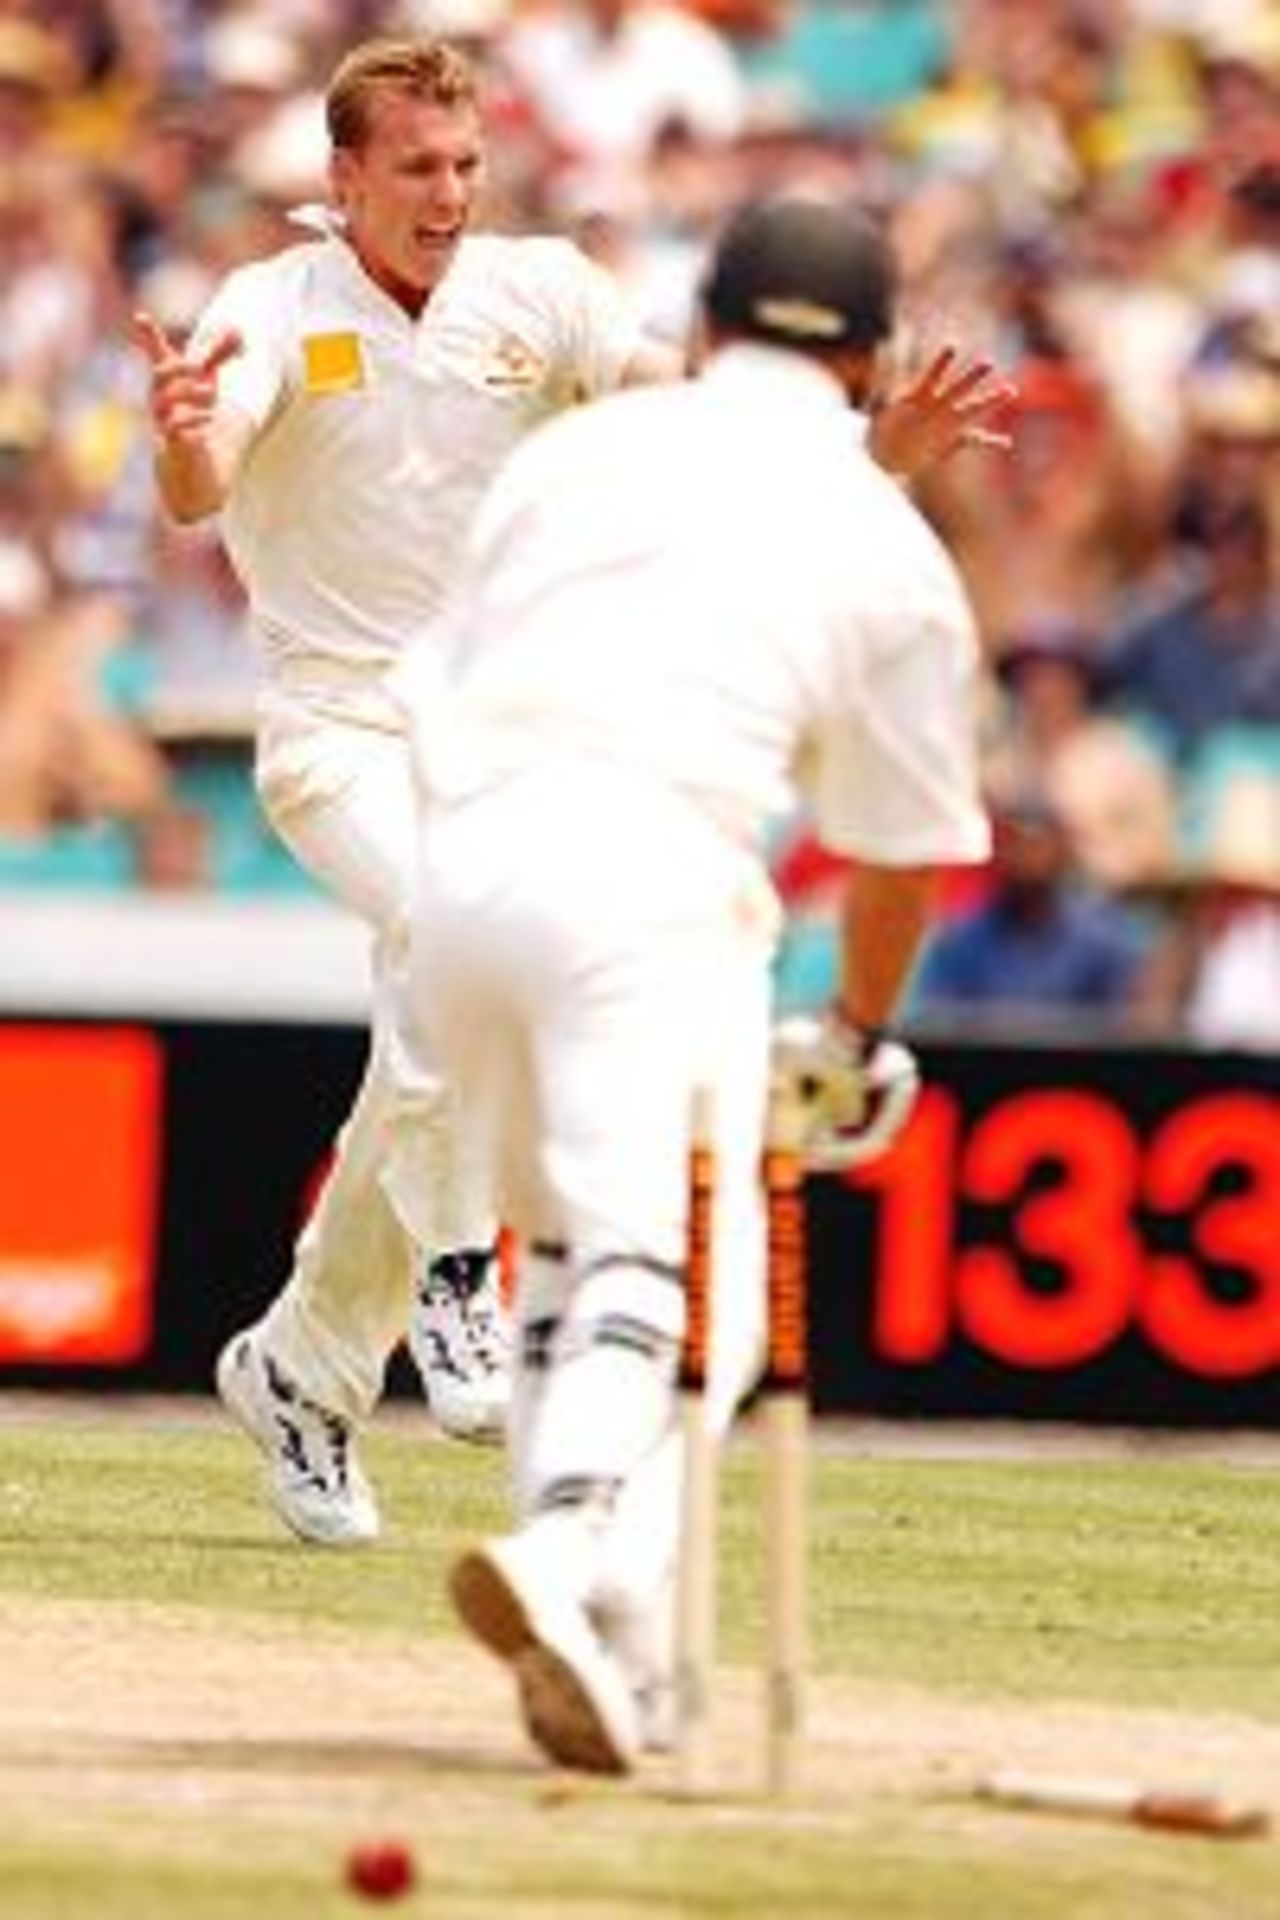 04 Jan 2002: Brett Lee of Australia celebrates after clean bowling Hershelle Gibbs of South Africa during the third day's play in the third test match between Australia and South Africa held at the Sydney Cricket Ground, Sydney, Australia.